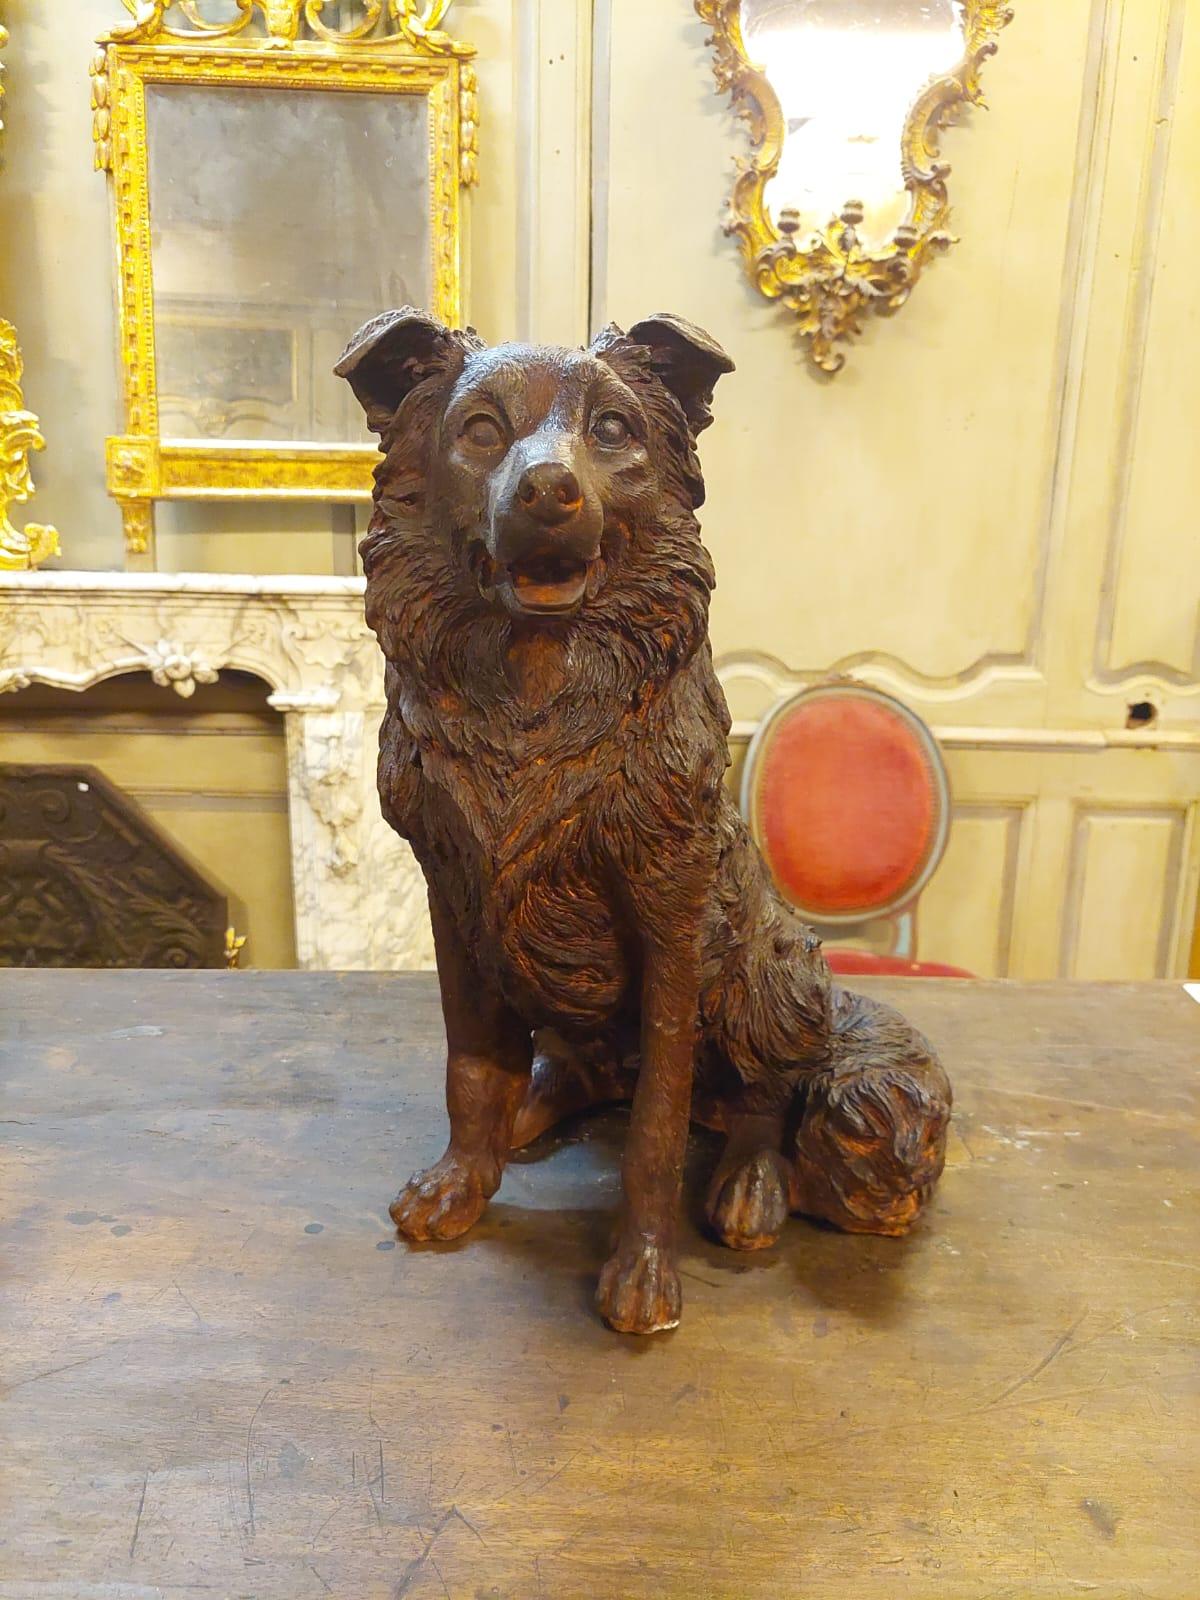 Vintage cast iron dog sculpture from the mid-1900s, made in Italy.
Good size, suitable for decorating a home, garden or any interior with a faithful friend.
Measures 30 x 40 x 48 H.